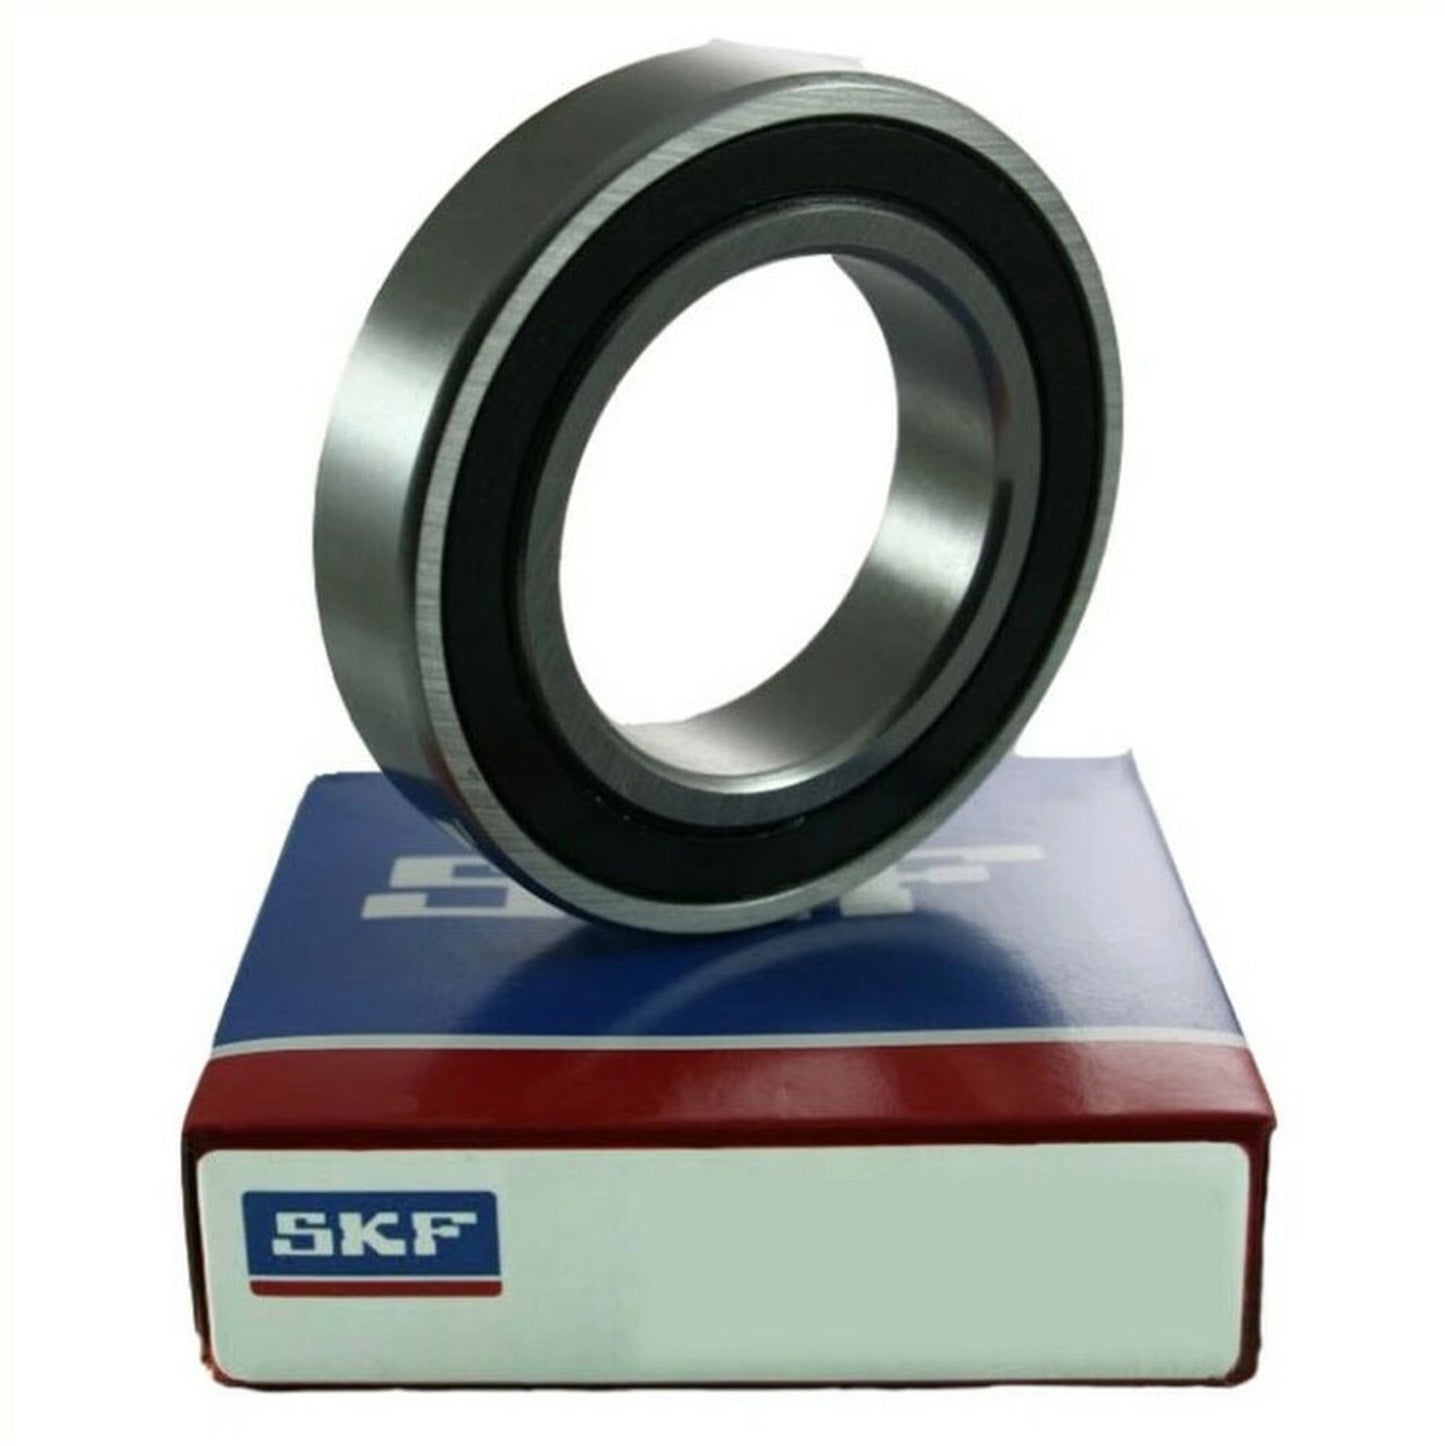 Lager 6208-2RS1 40x80x18 SKF